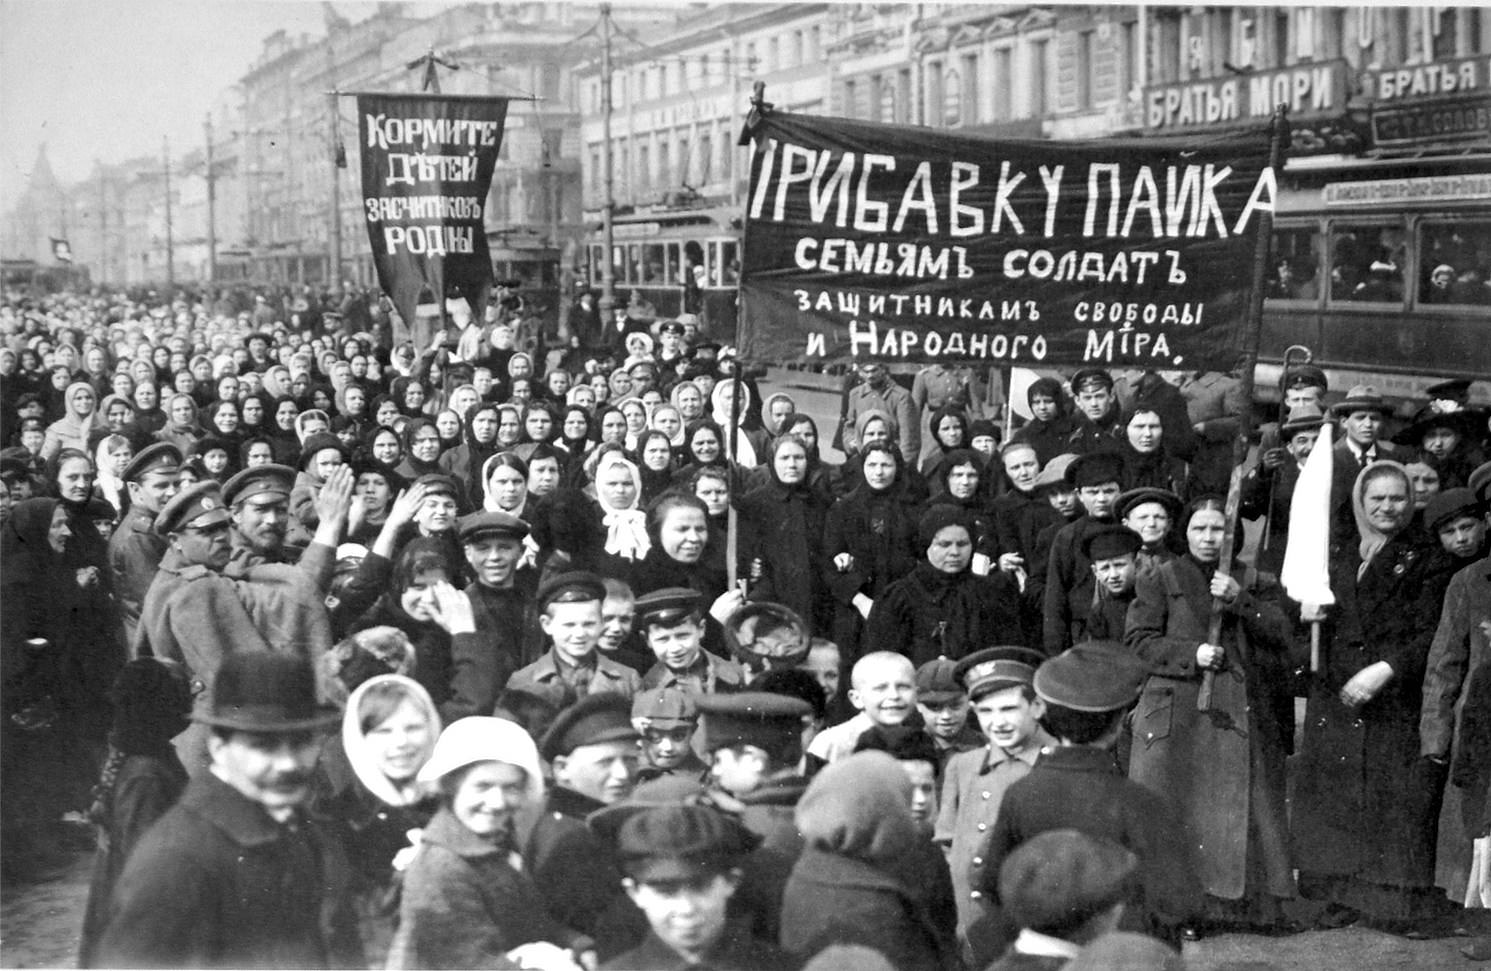 Mutinous soldiers, workers, women and children march during the Russian Revolution in 1905.